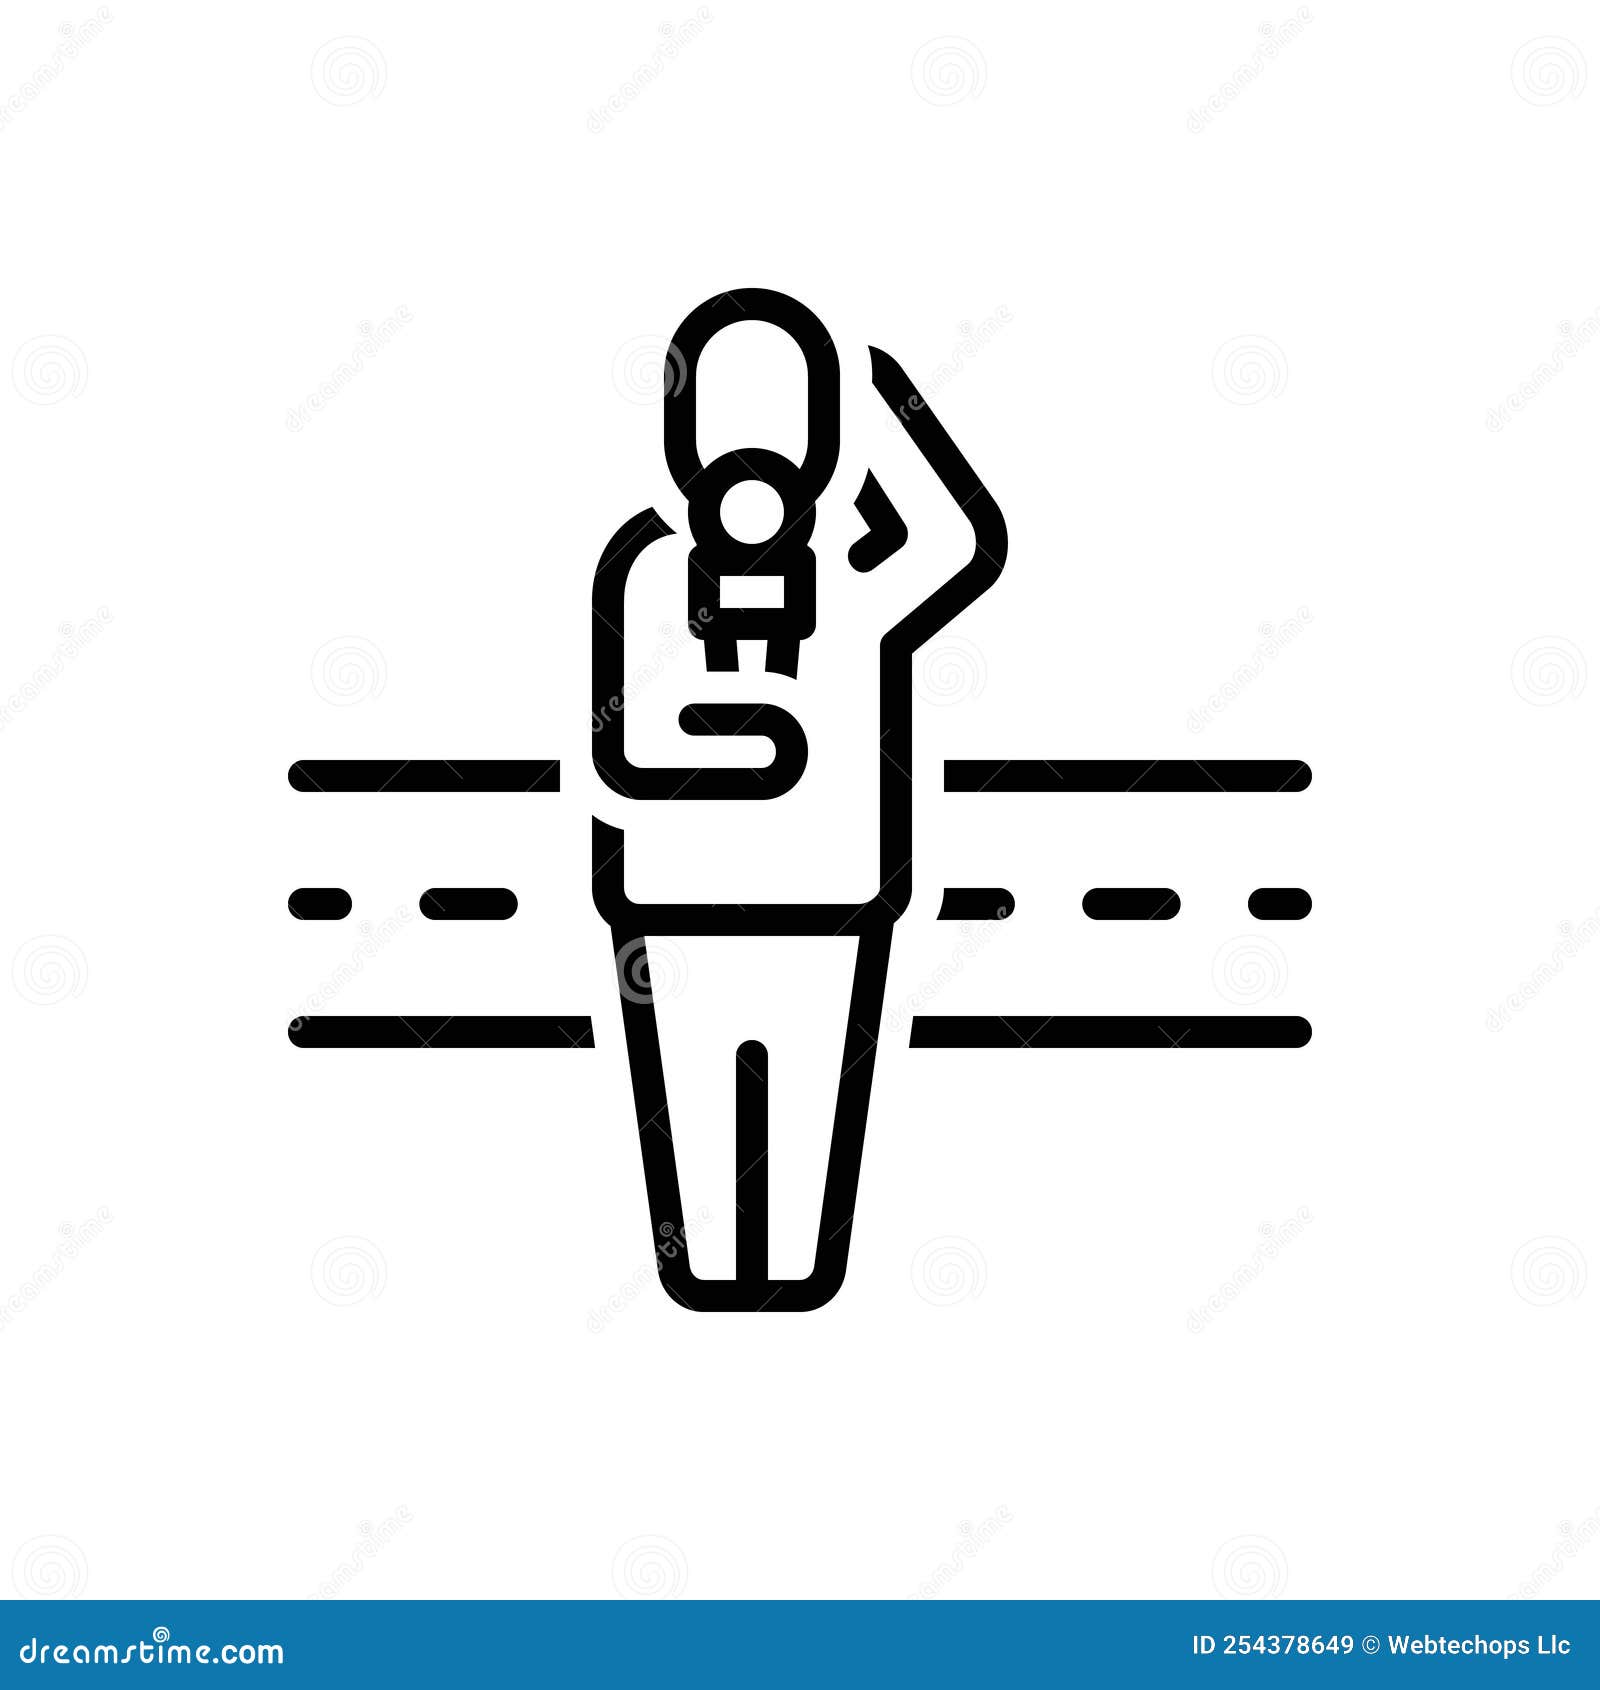 black line icon for reporter, press and newsman